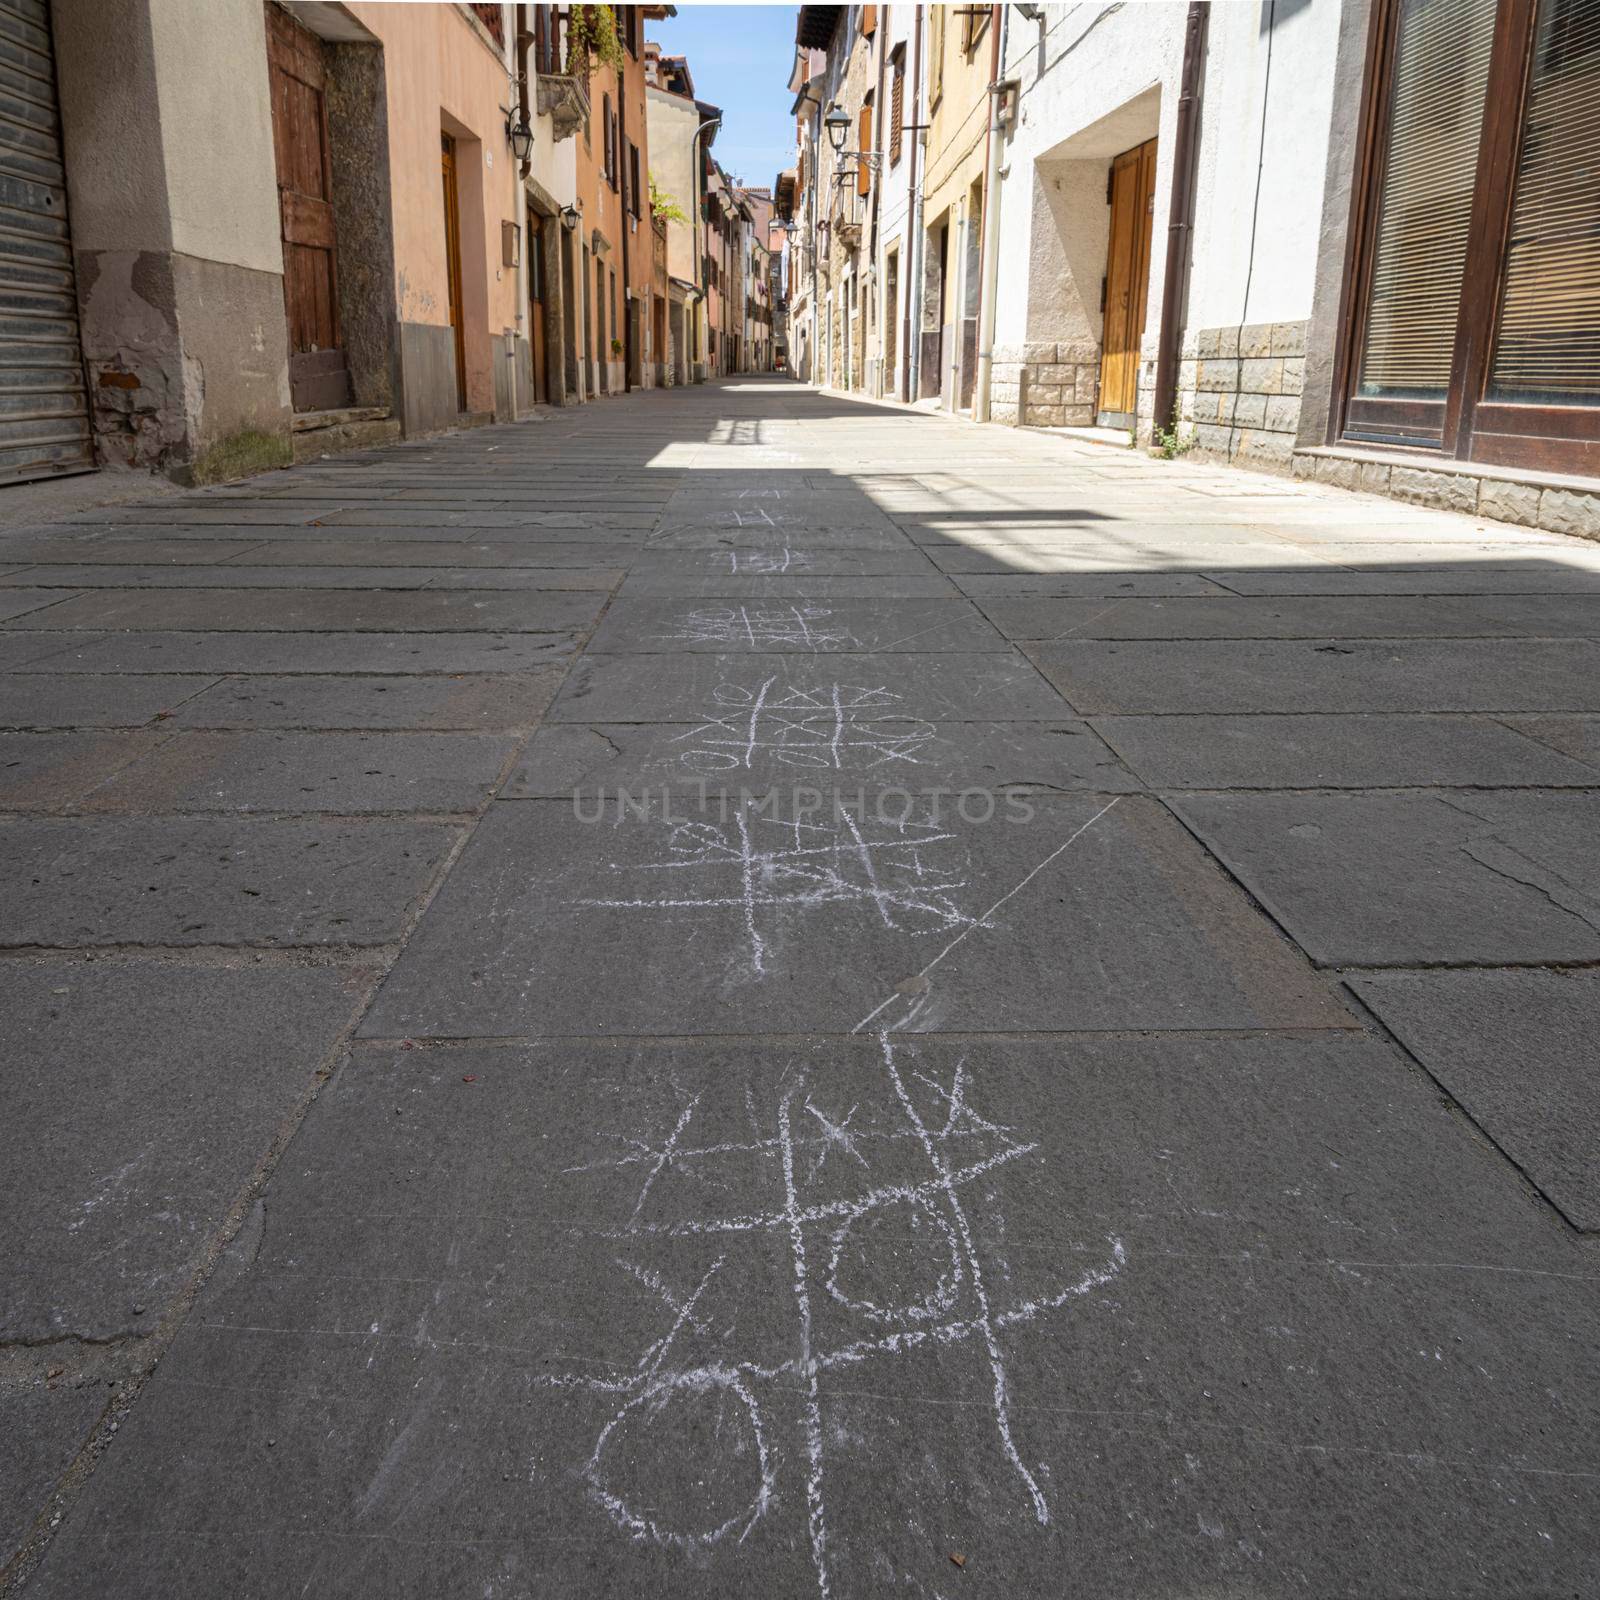 Muggia, Italy. June 13, 2021. the tic-tac-toe game drawn with chalk on the pavement of a narrow street in the town center